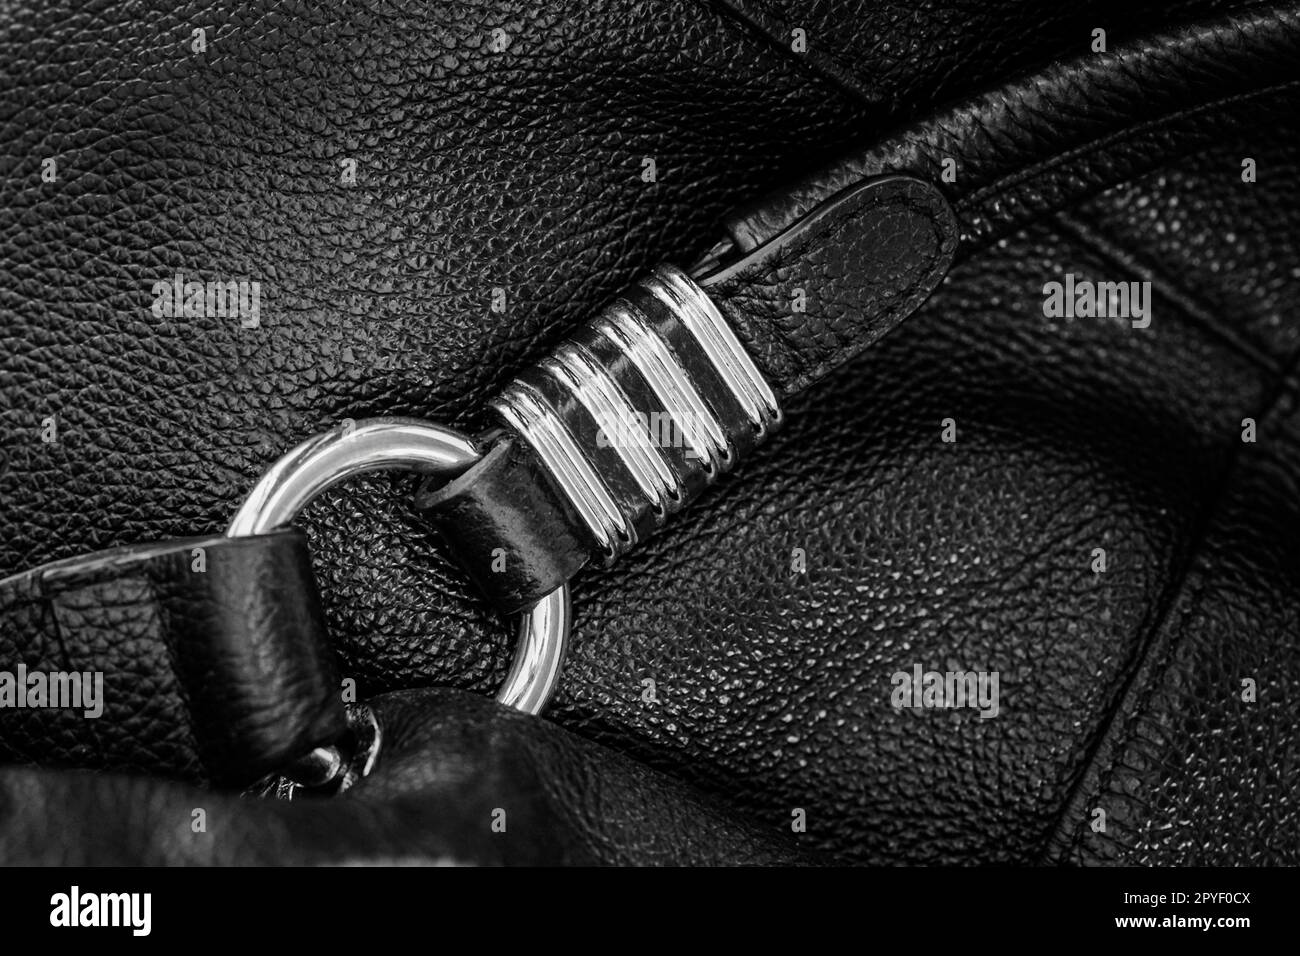 Silver bag buckle, metal detail of leather handbag close-up, blur background. Selective focus Stock Photo